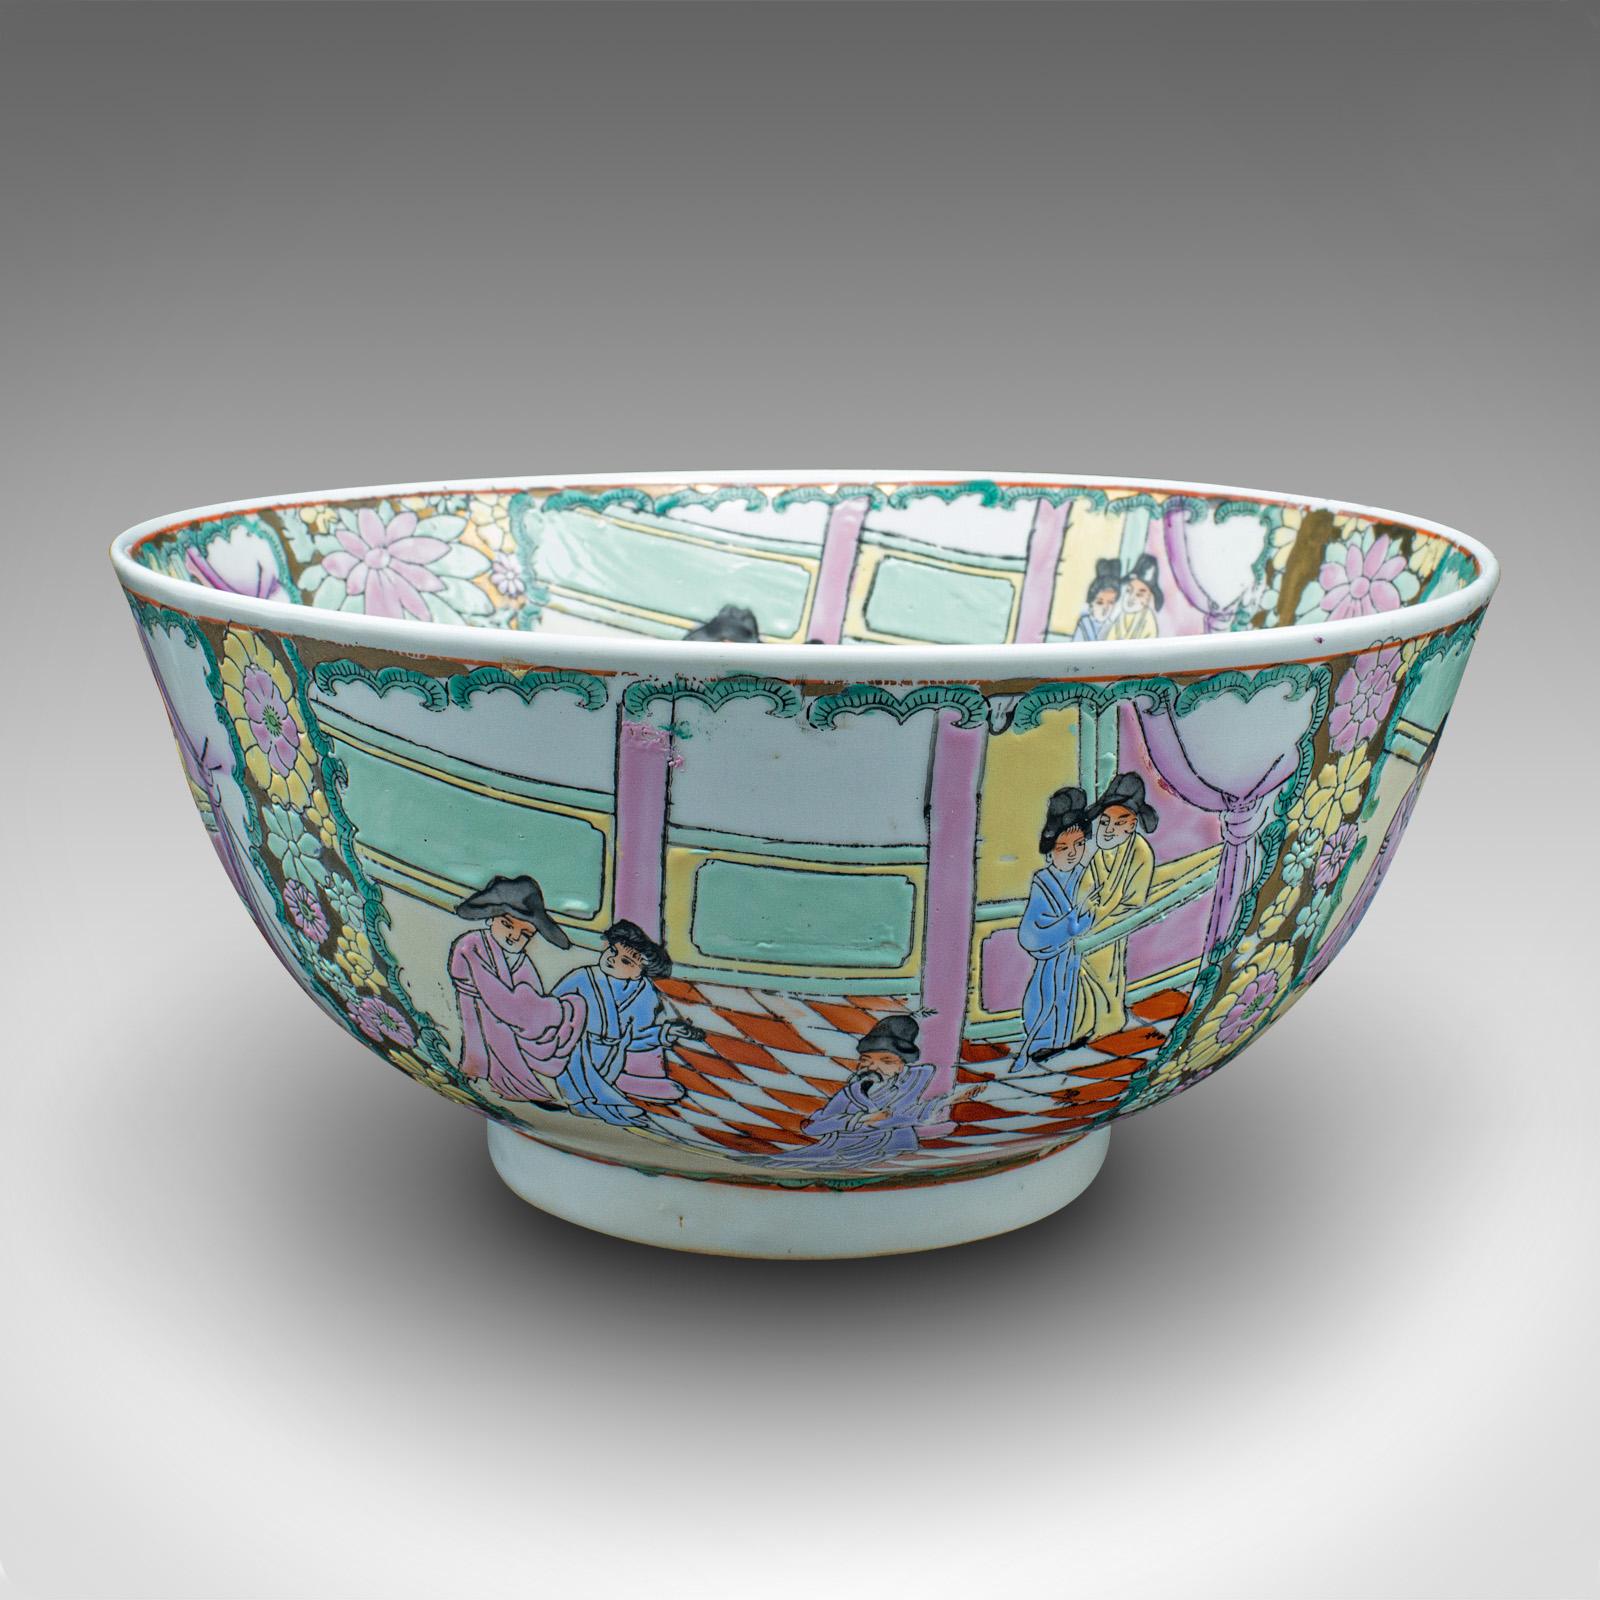 Antique Decorative Bowl, Chinese, Ceramic Serving Dish, Qing Dynasty, Victorian For Sale 1